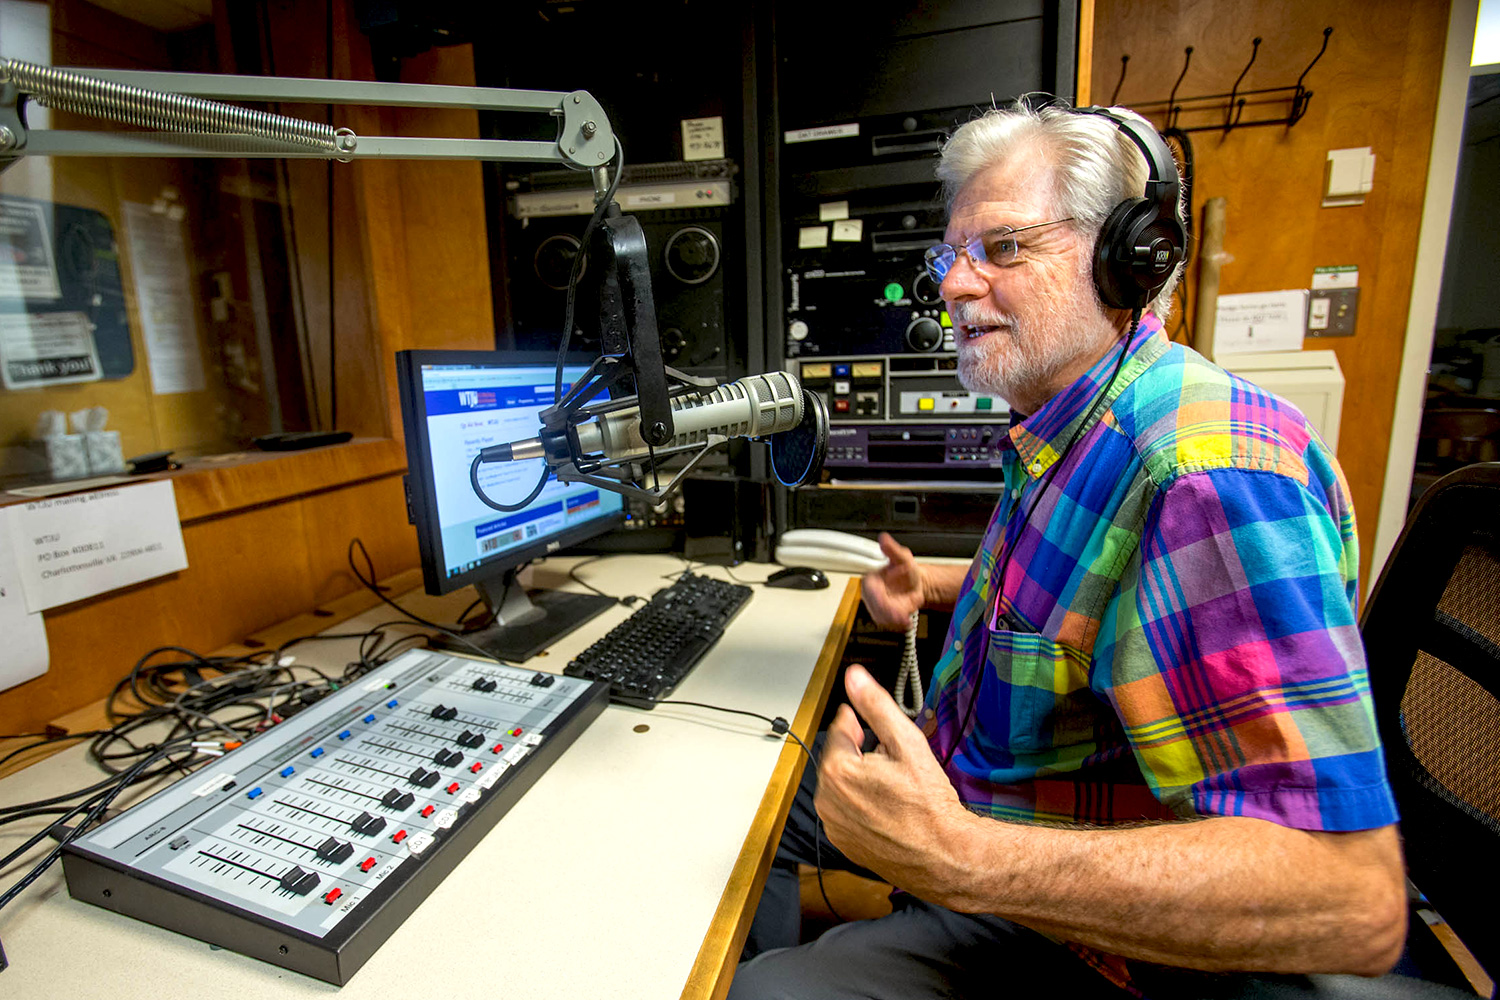 Dave Rodgers recording a radio show in front of a microphone with headphones on